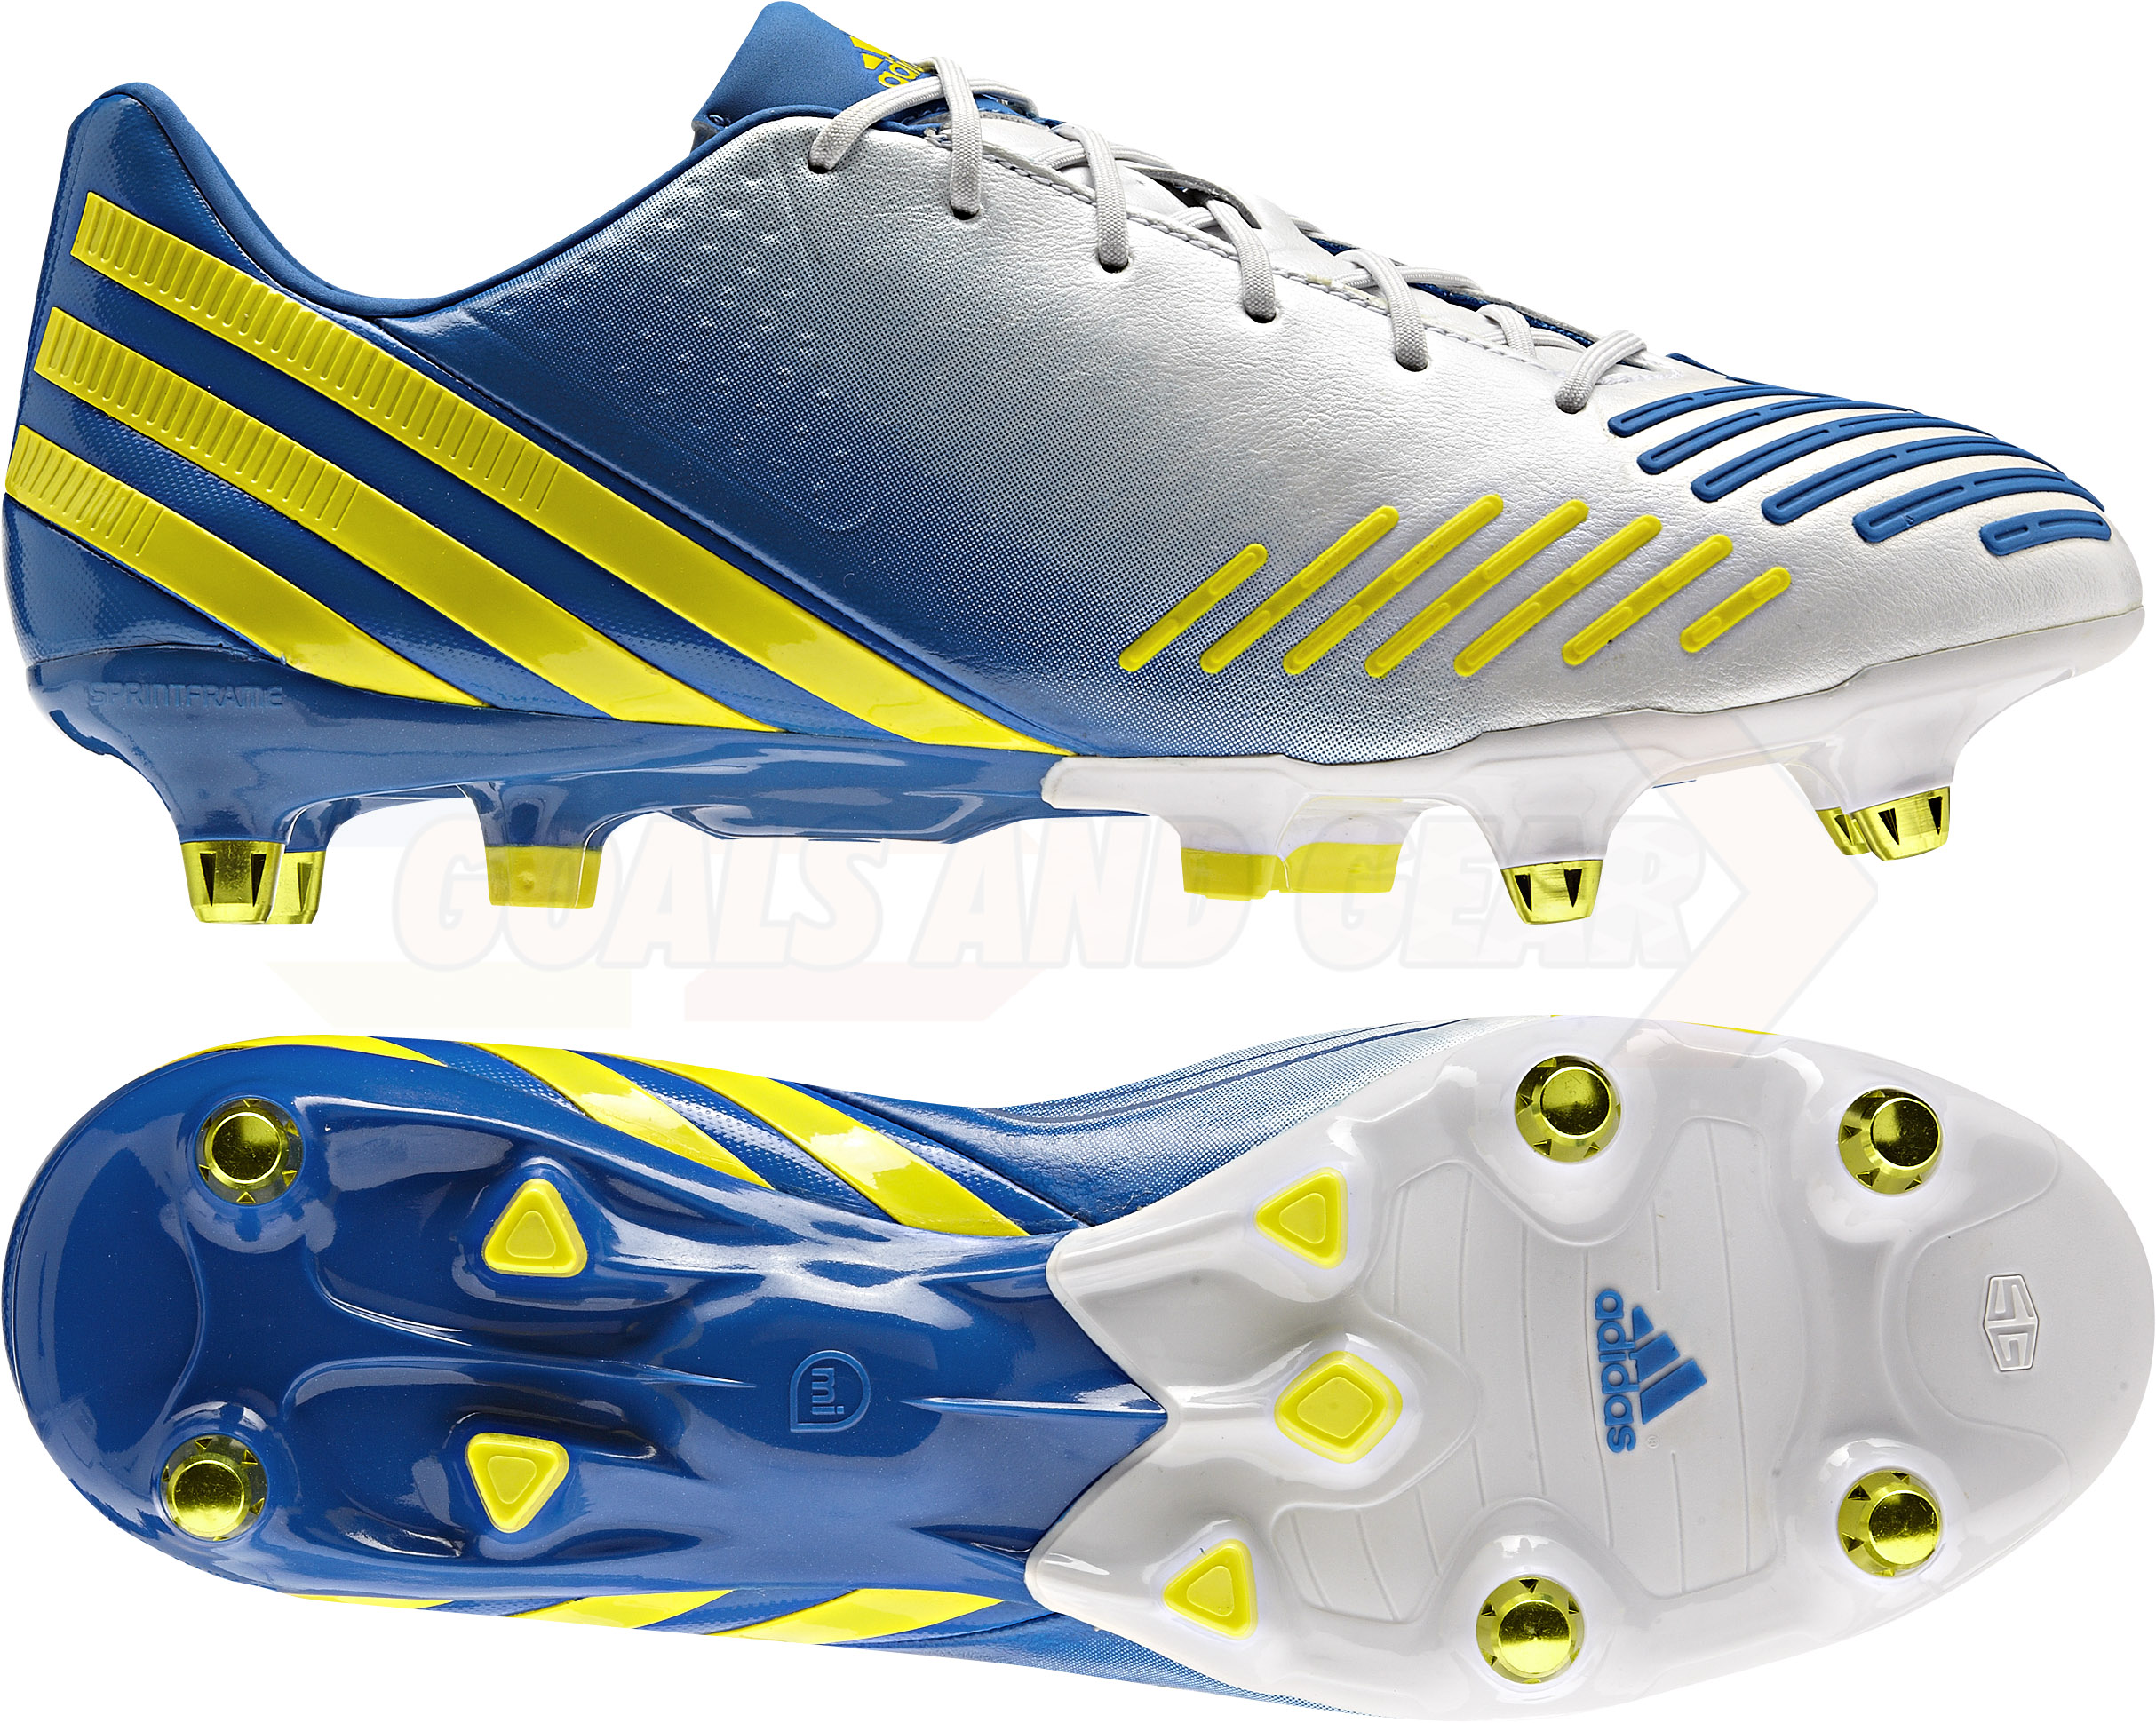 Adidas LZ Running White/Vivid Yellow/Prime Blue | Goals and Gear